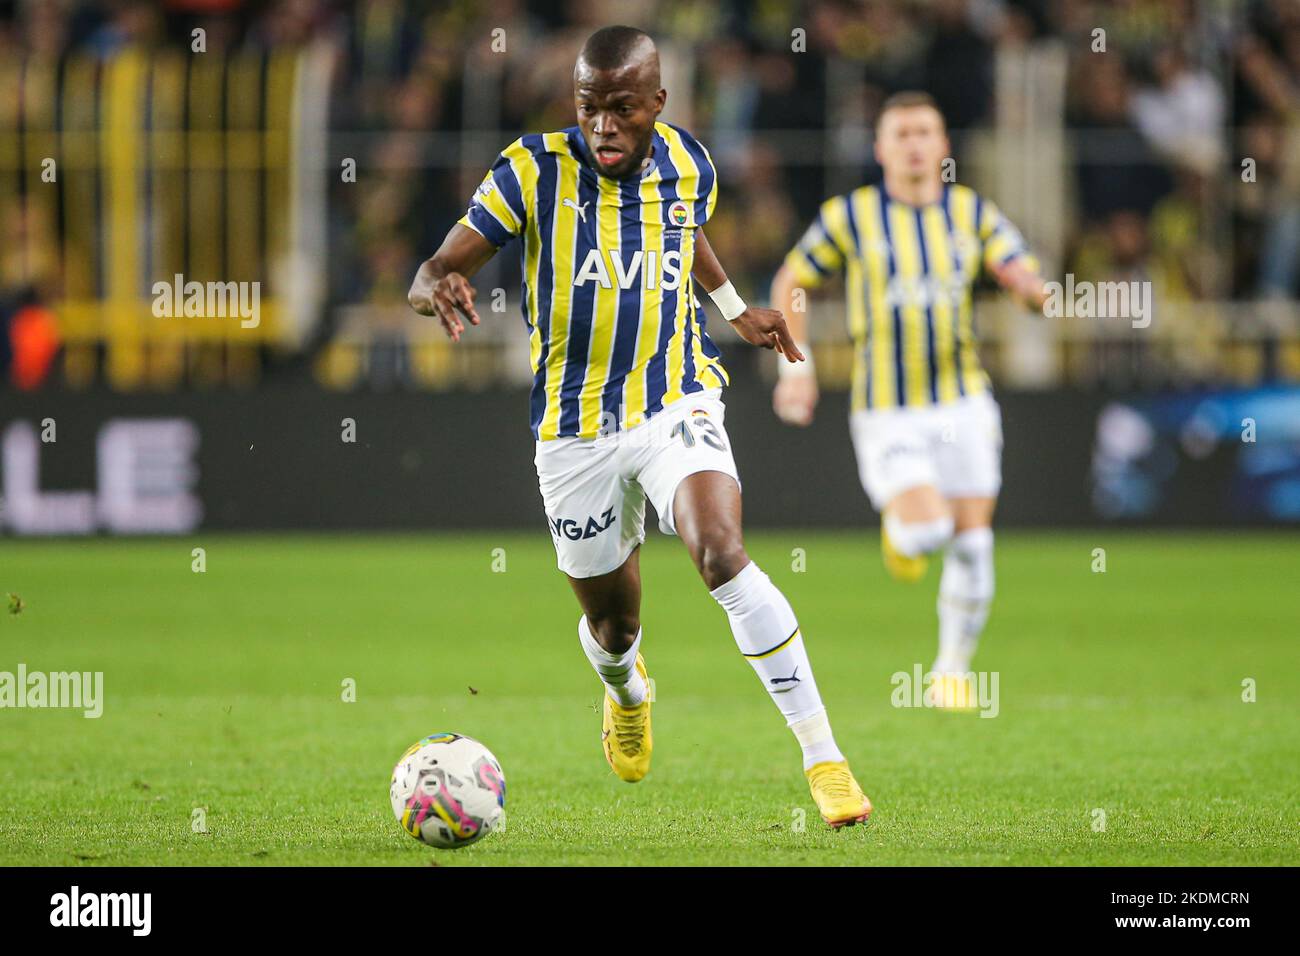 ISTANBUL, TURKEY - NOVEMBER 7: Enner Valencia of Fenerbahce during the Turkish Super Lig match between Fenerbahce and Sivasspor at Sukru Saracoglu Stadium on November 7, 2022 in Istanbul, Turkey (Photo by Orange Pictures) Stock Photo